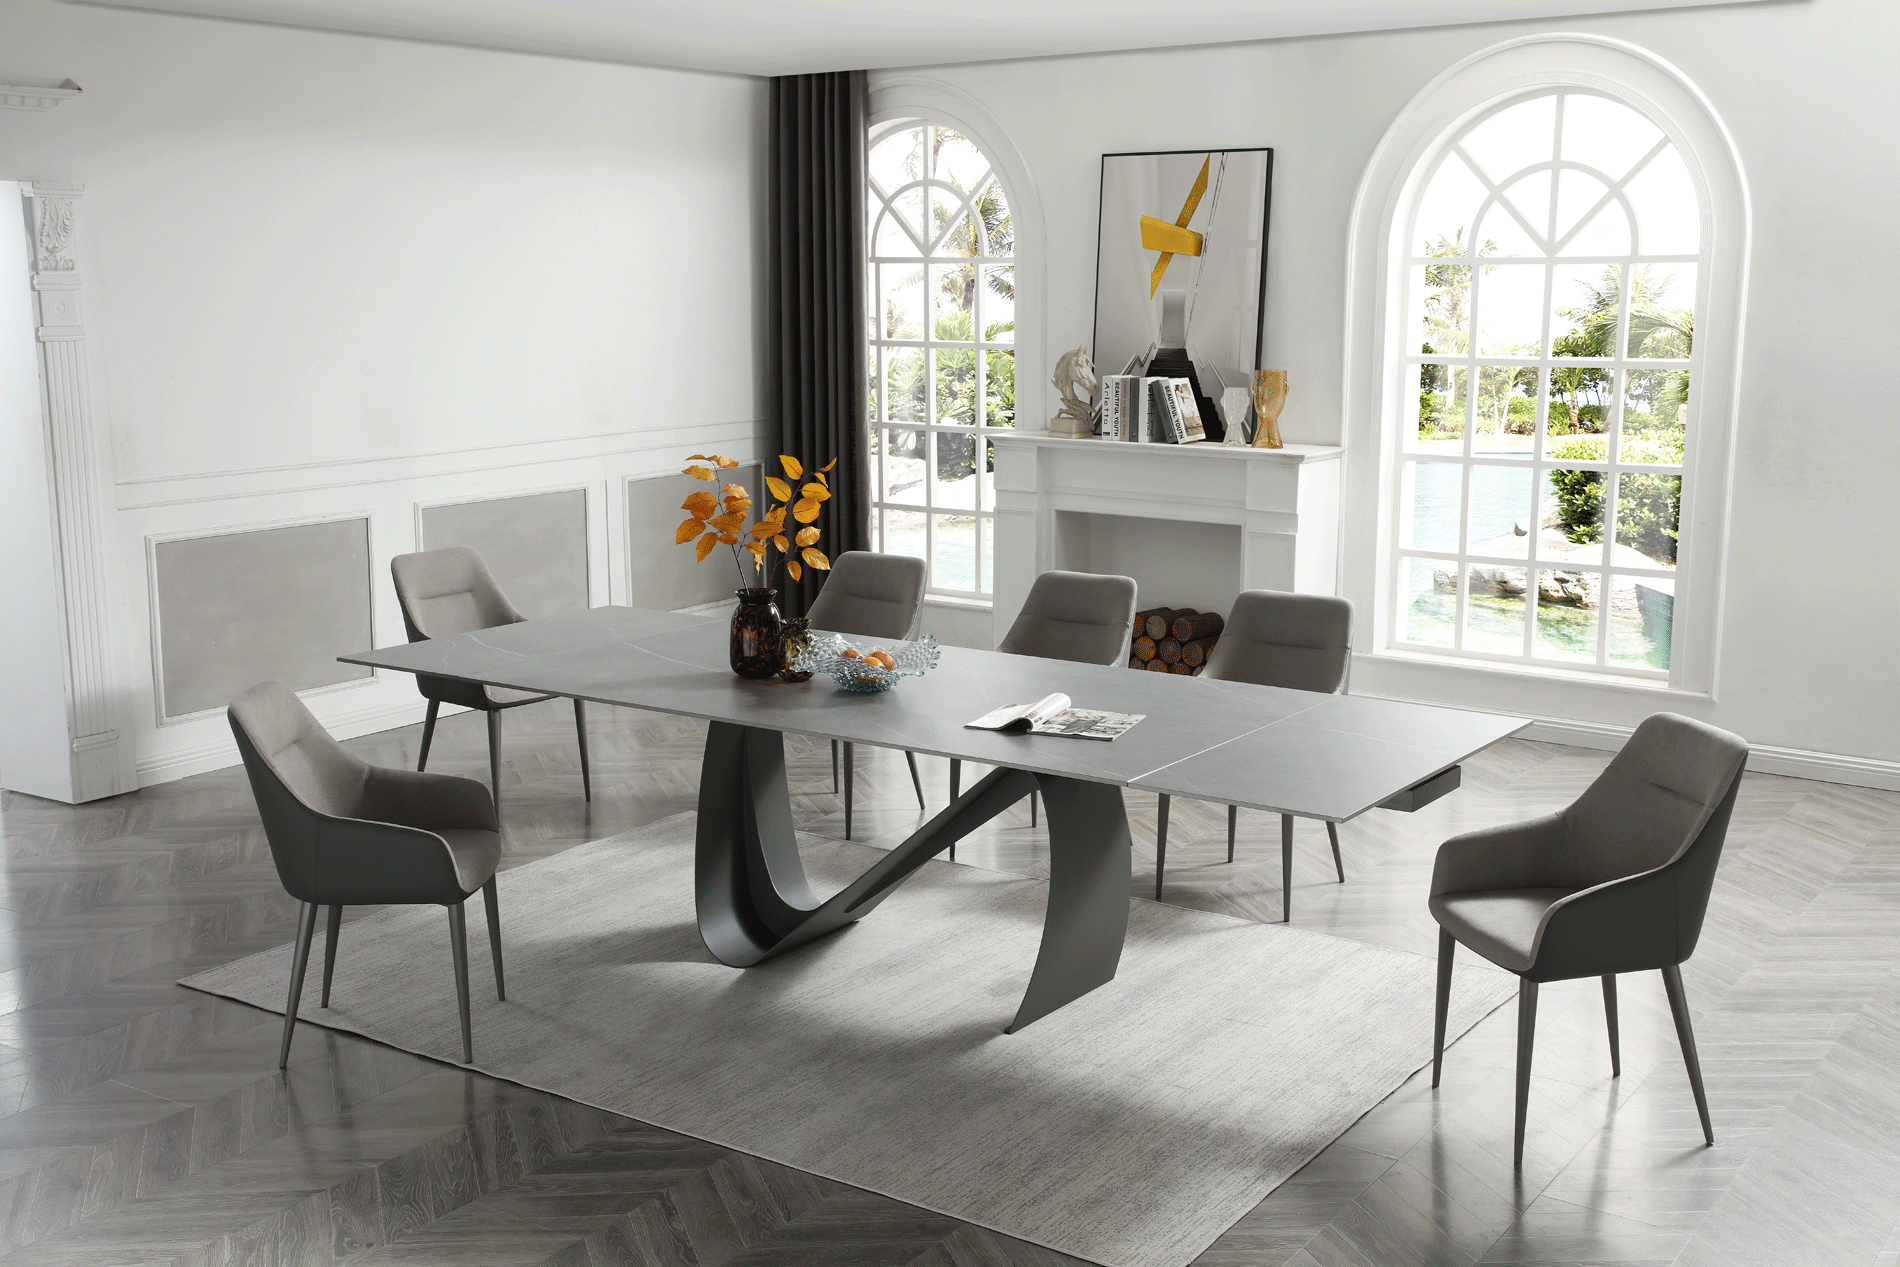 Brands Franco AZKARY II SIDEBOARDS, SPAIN 9087 Table Dark grey with 1254 chairs